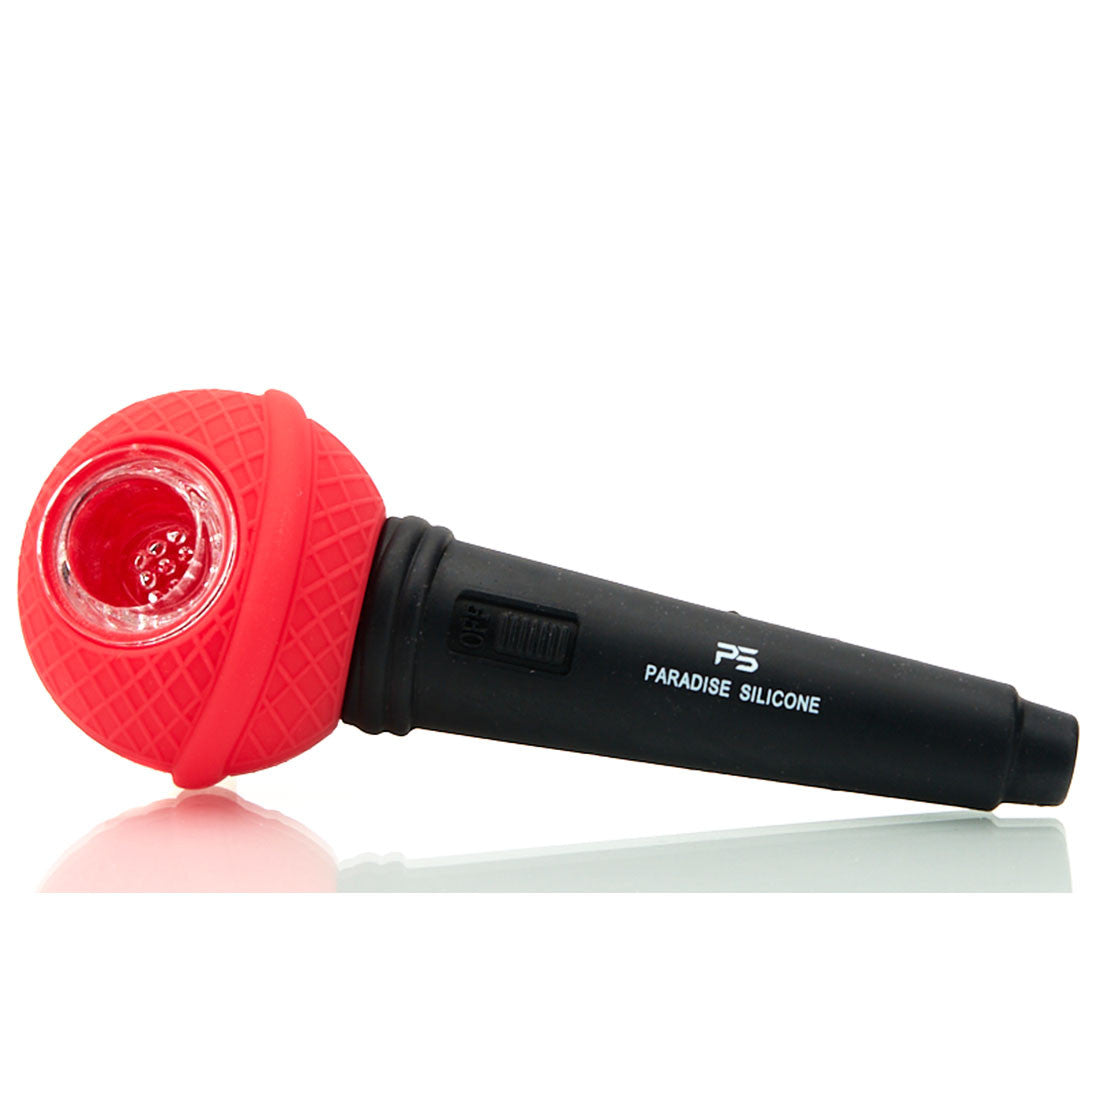 Paradise Silicone The Mic Hand Pipe with Black with built in screen. Available in multi-colors